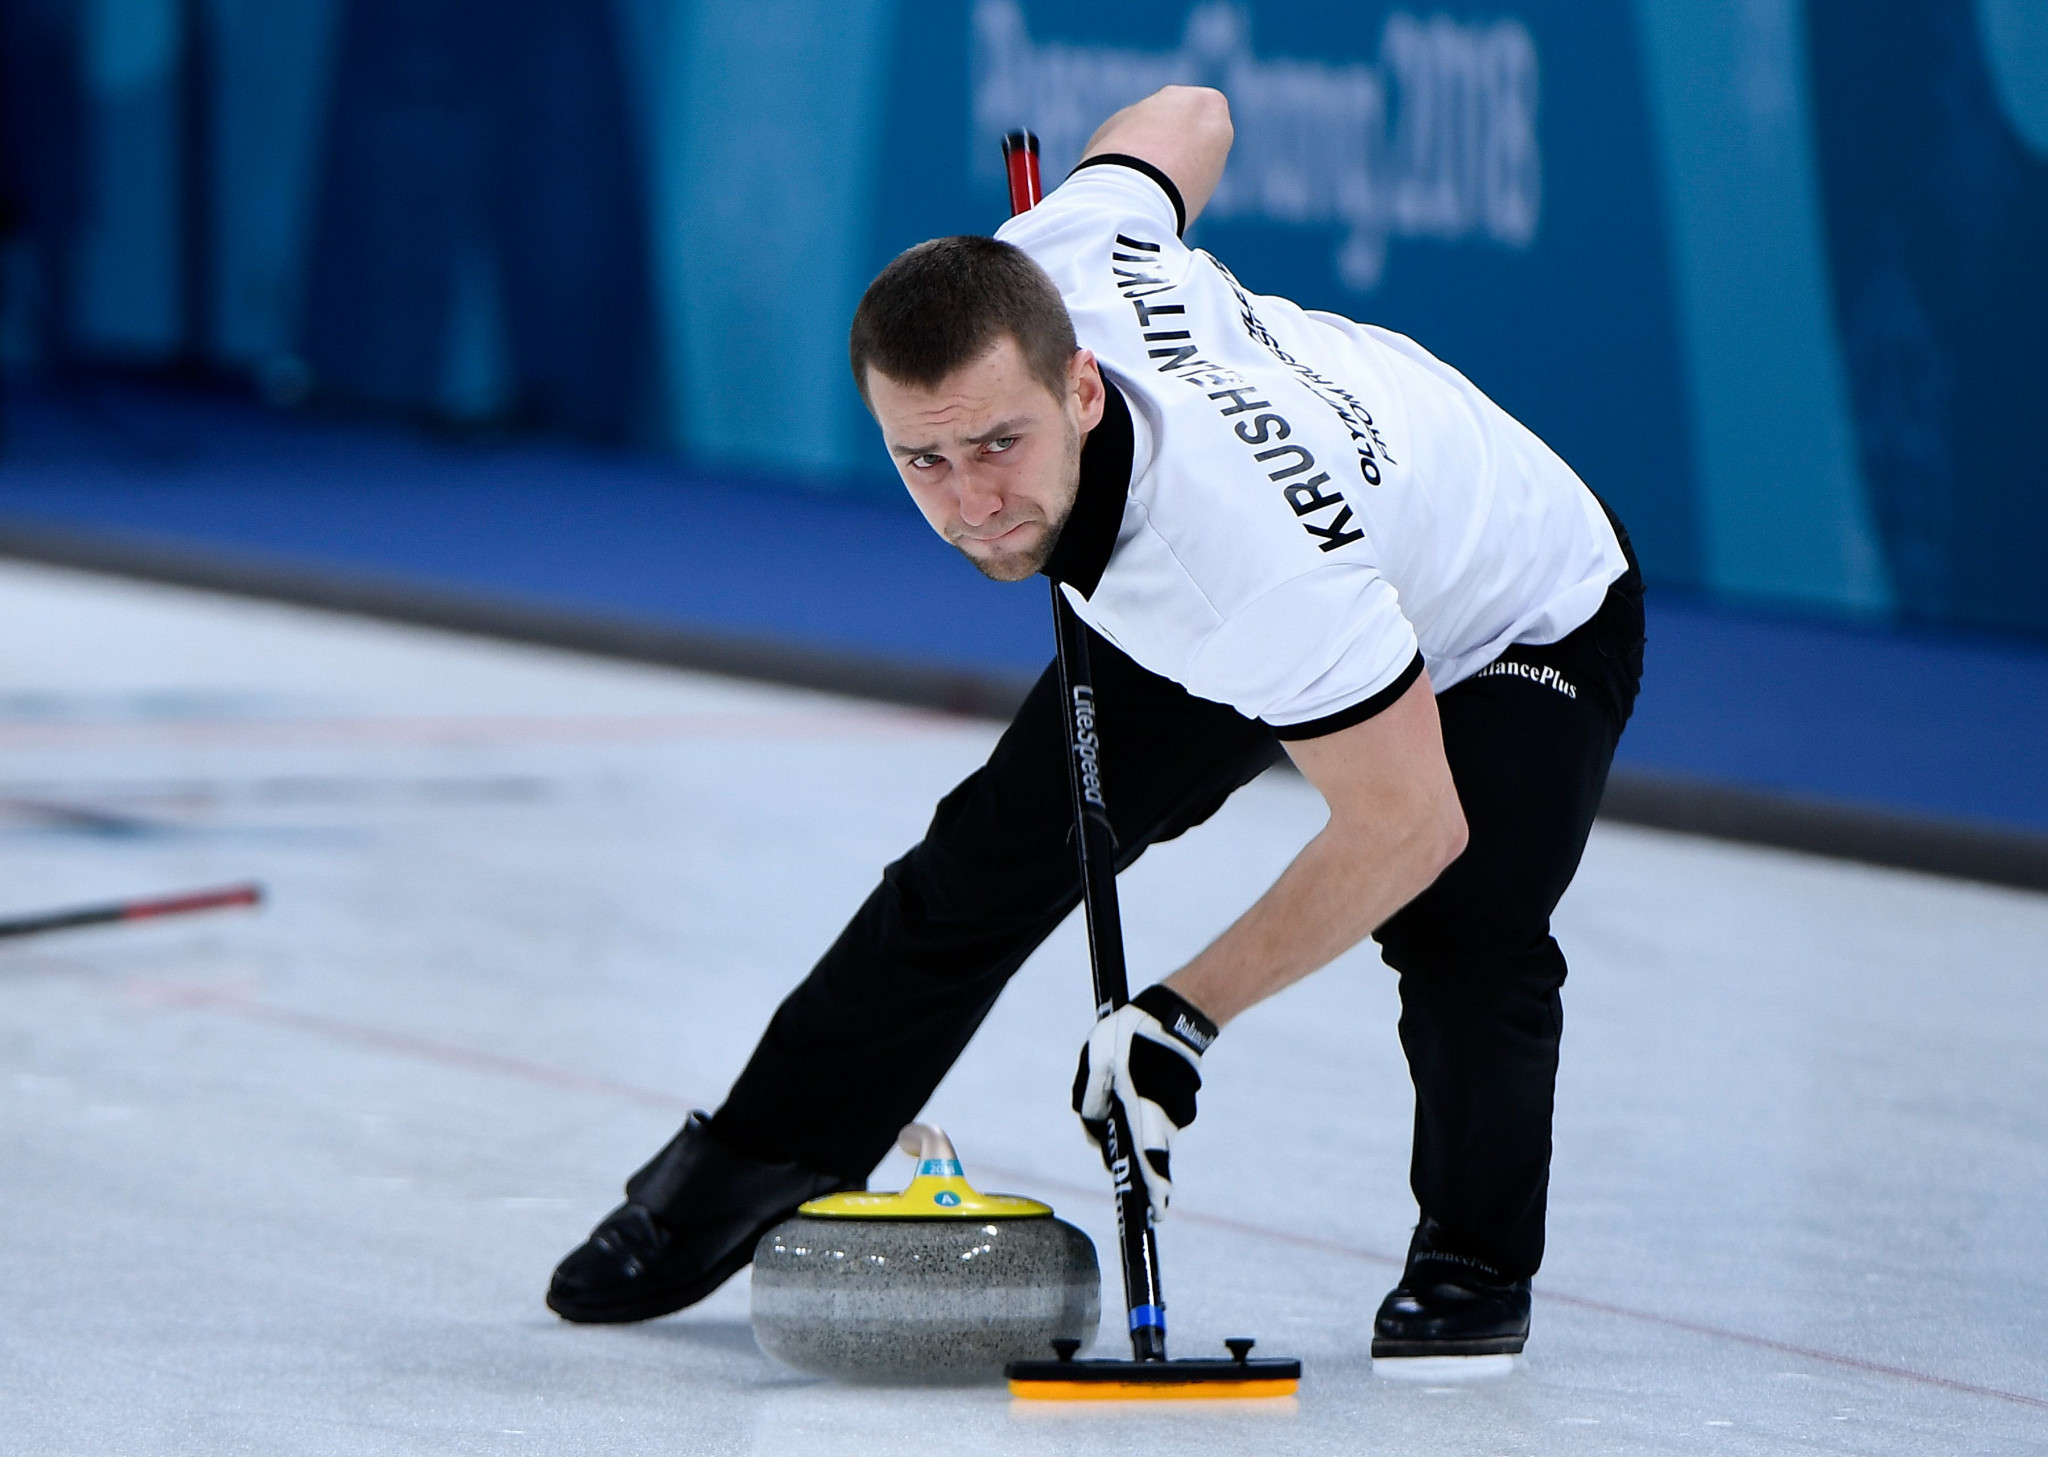 Russian curler Alexander Krushelnitskiy's four-year doping ban from the Pyeongchang 2018 Winter Olympics expired last year ©Getty Images